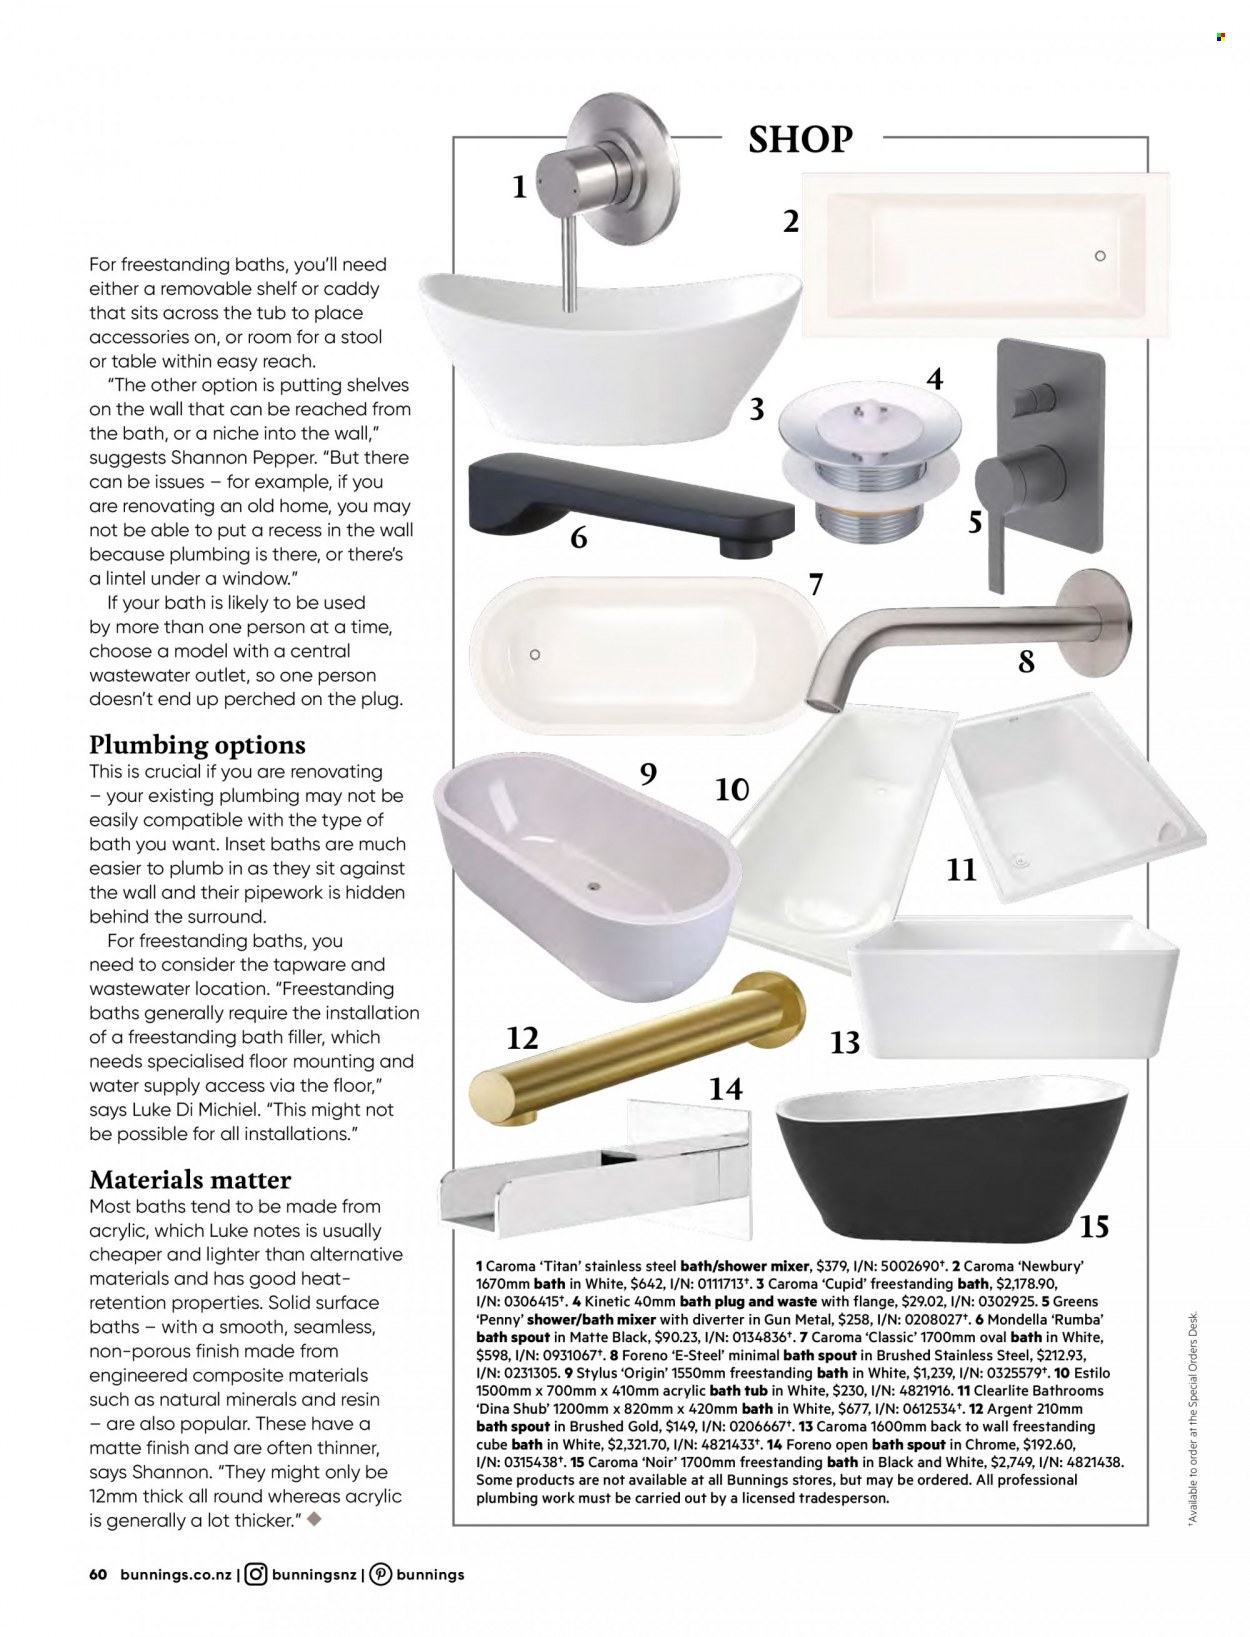 thumbnail - Bunnings Warehouse mailer - Sales products - bath mixer, shower mixer, table, stool, shelves, desk. Page 60.